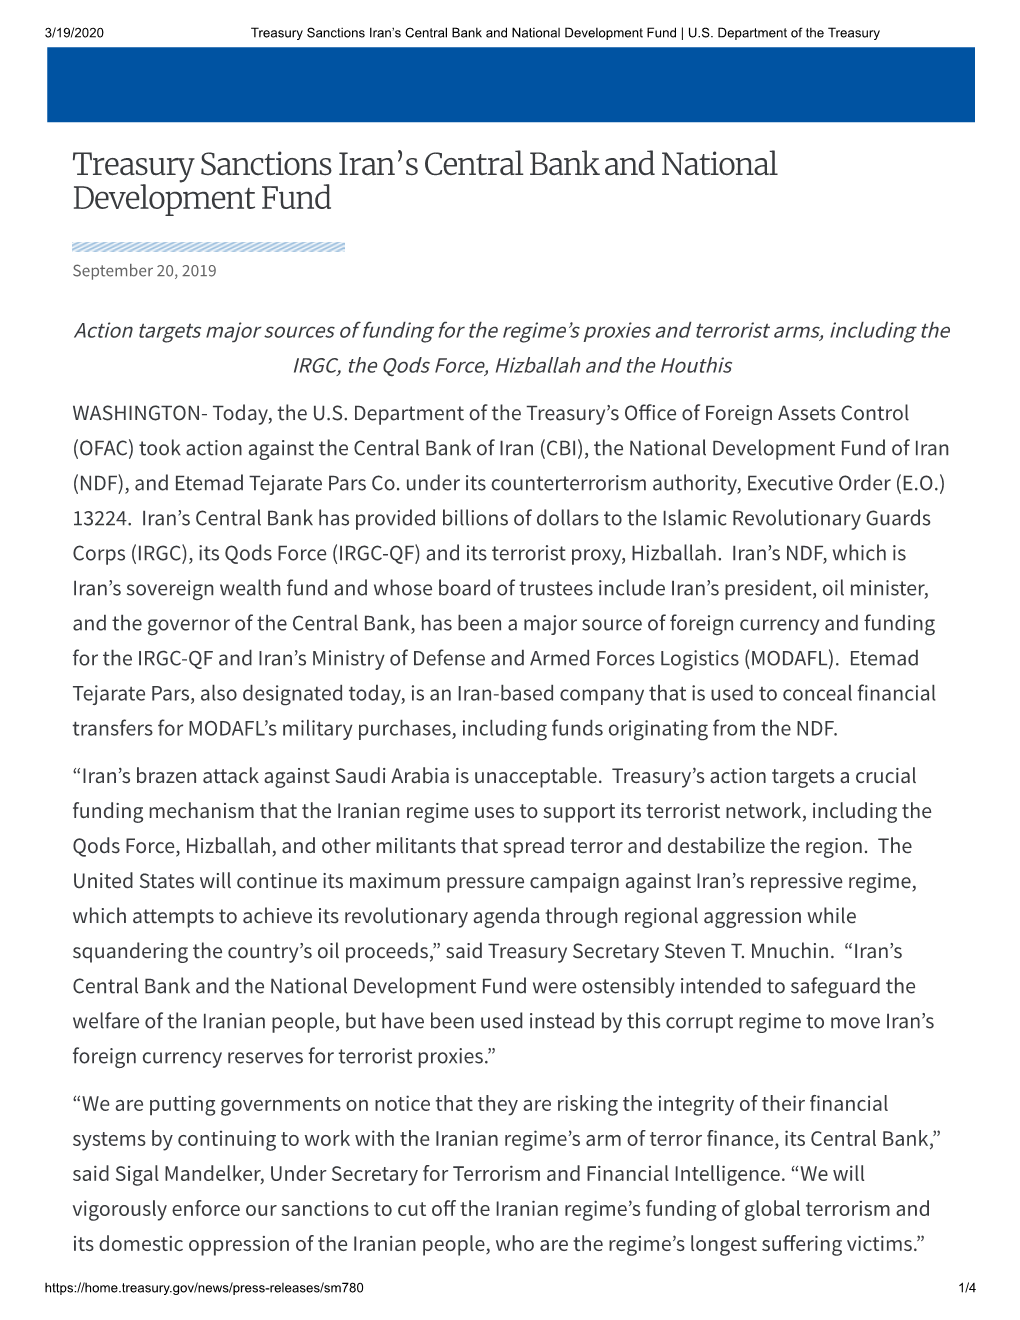 Treasury Sanctions Iran's Central Bank and National Development